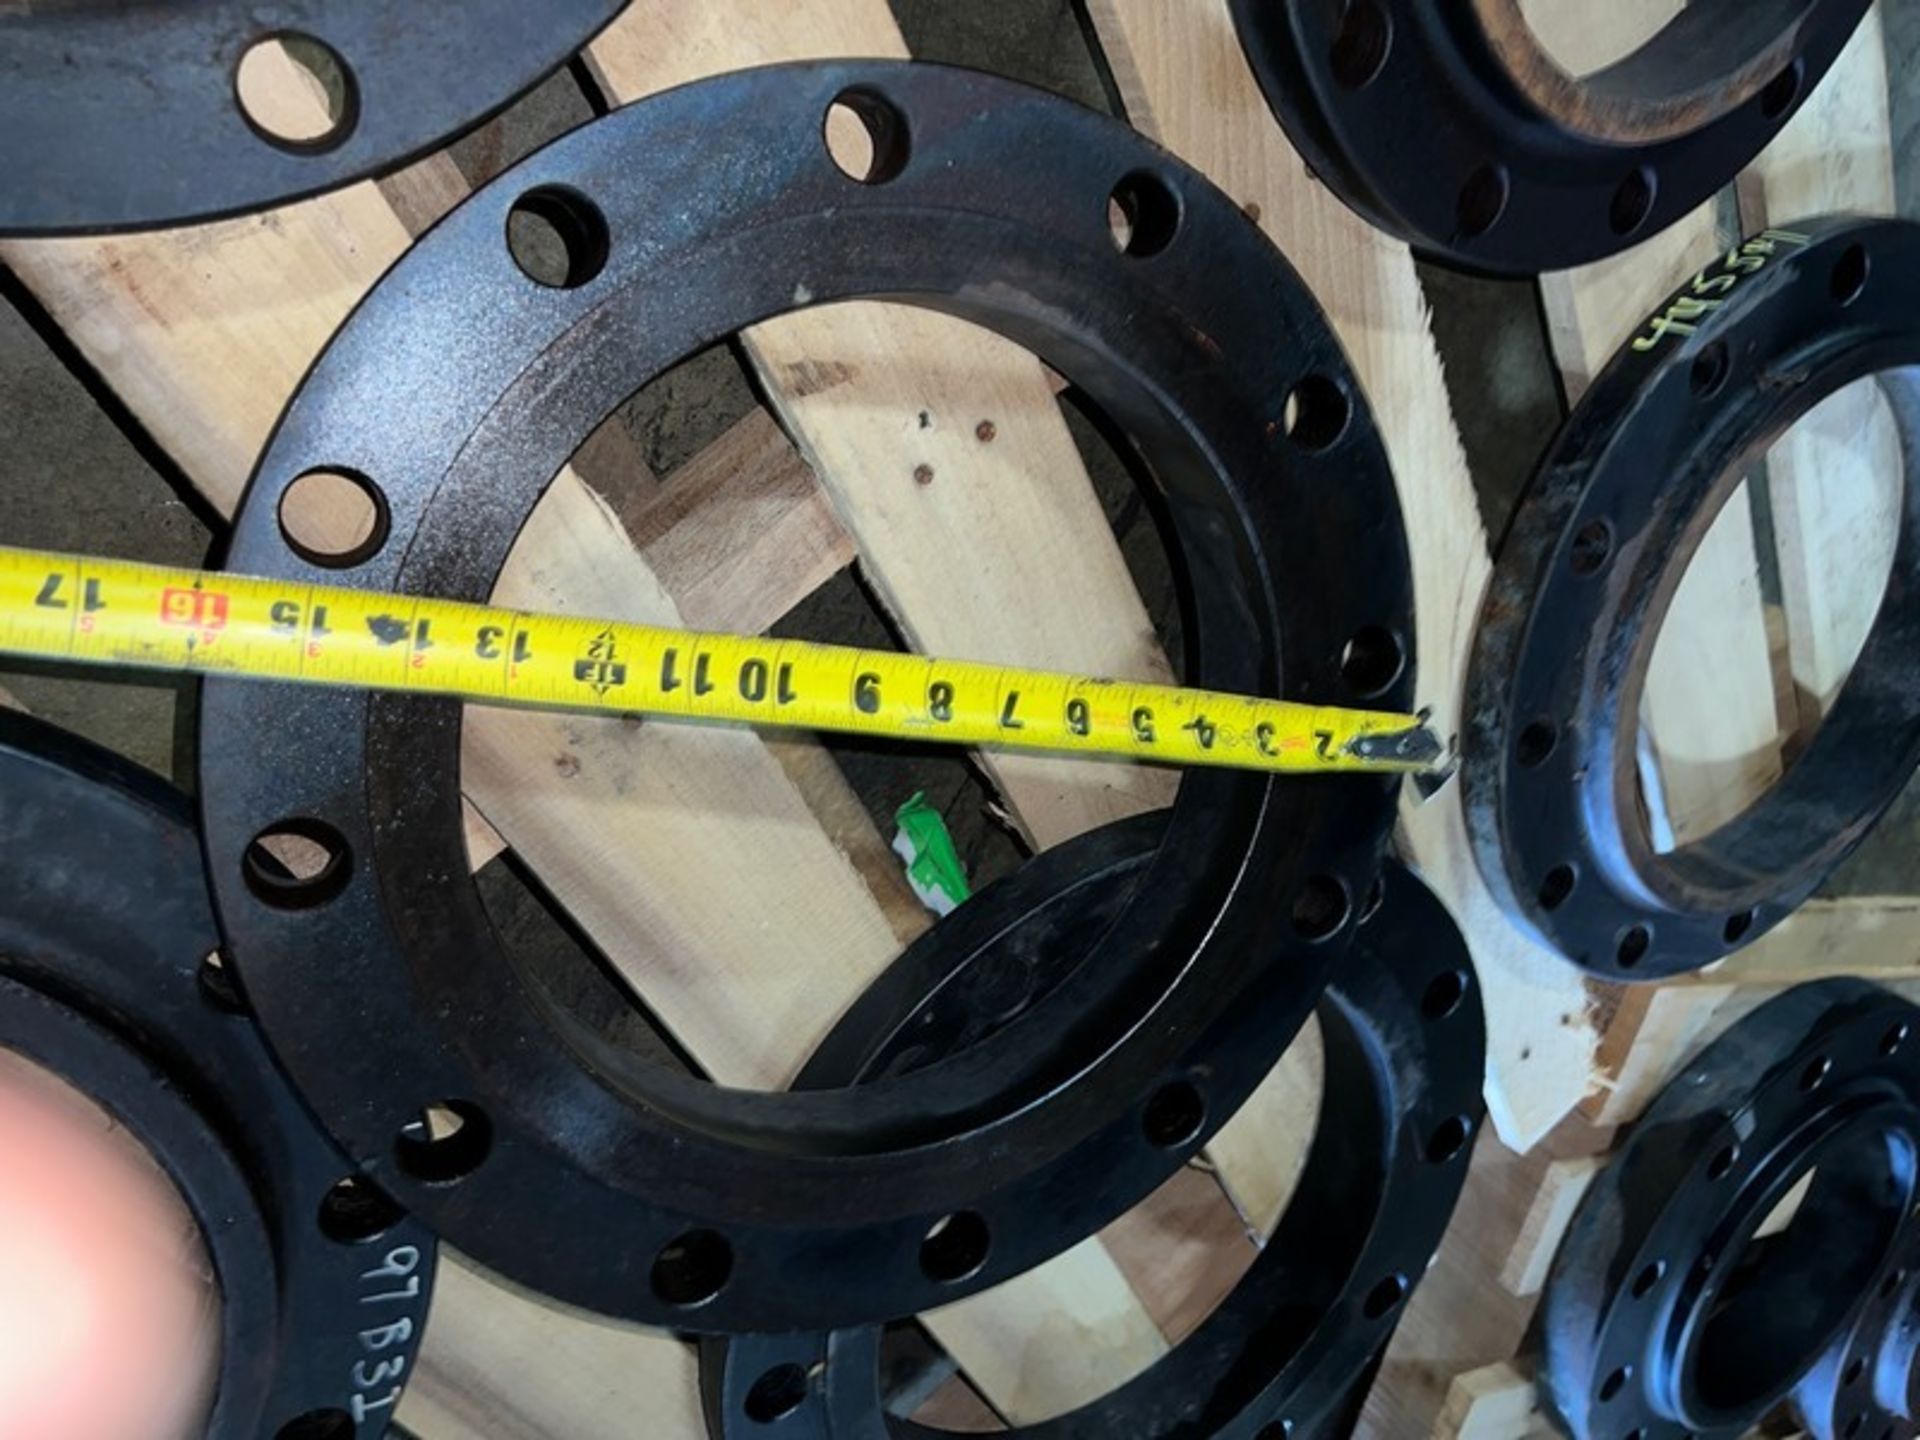 One Lot 4 Cast Iron Pipe Flanges 15" OD, 8.75" ID, 12 Bolt Holes, 1" thickness, 2" bore depth ( - Image 2 of 5